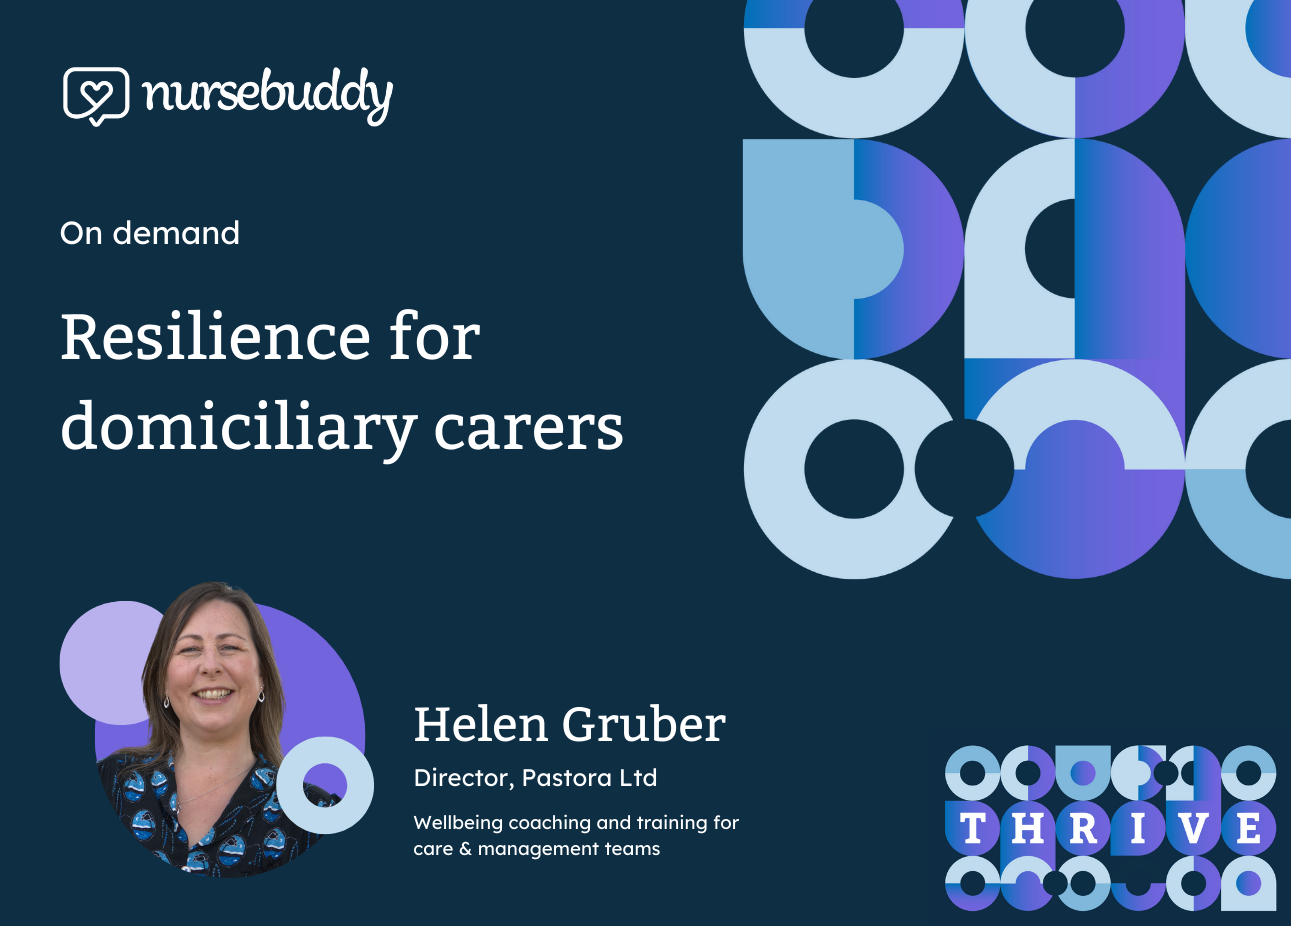 Resilience for domiciliary carers - an on-demand webinar from Nursebuddy with Pastora